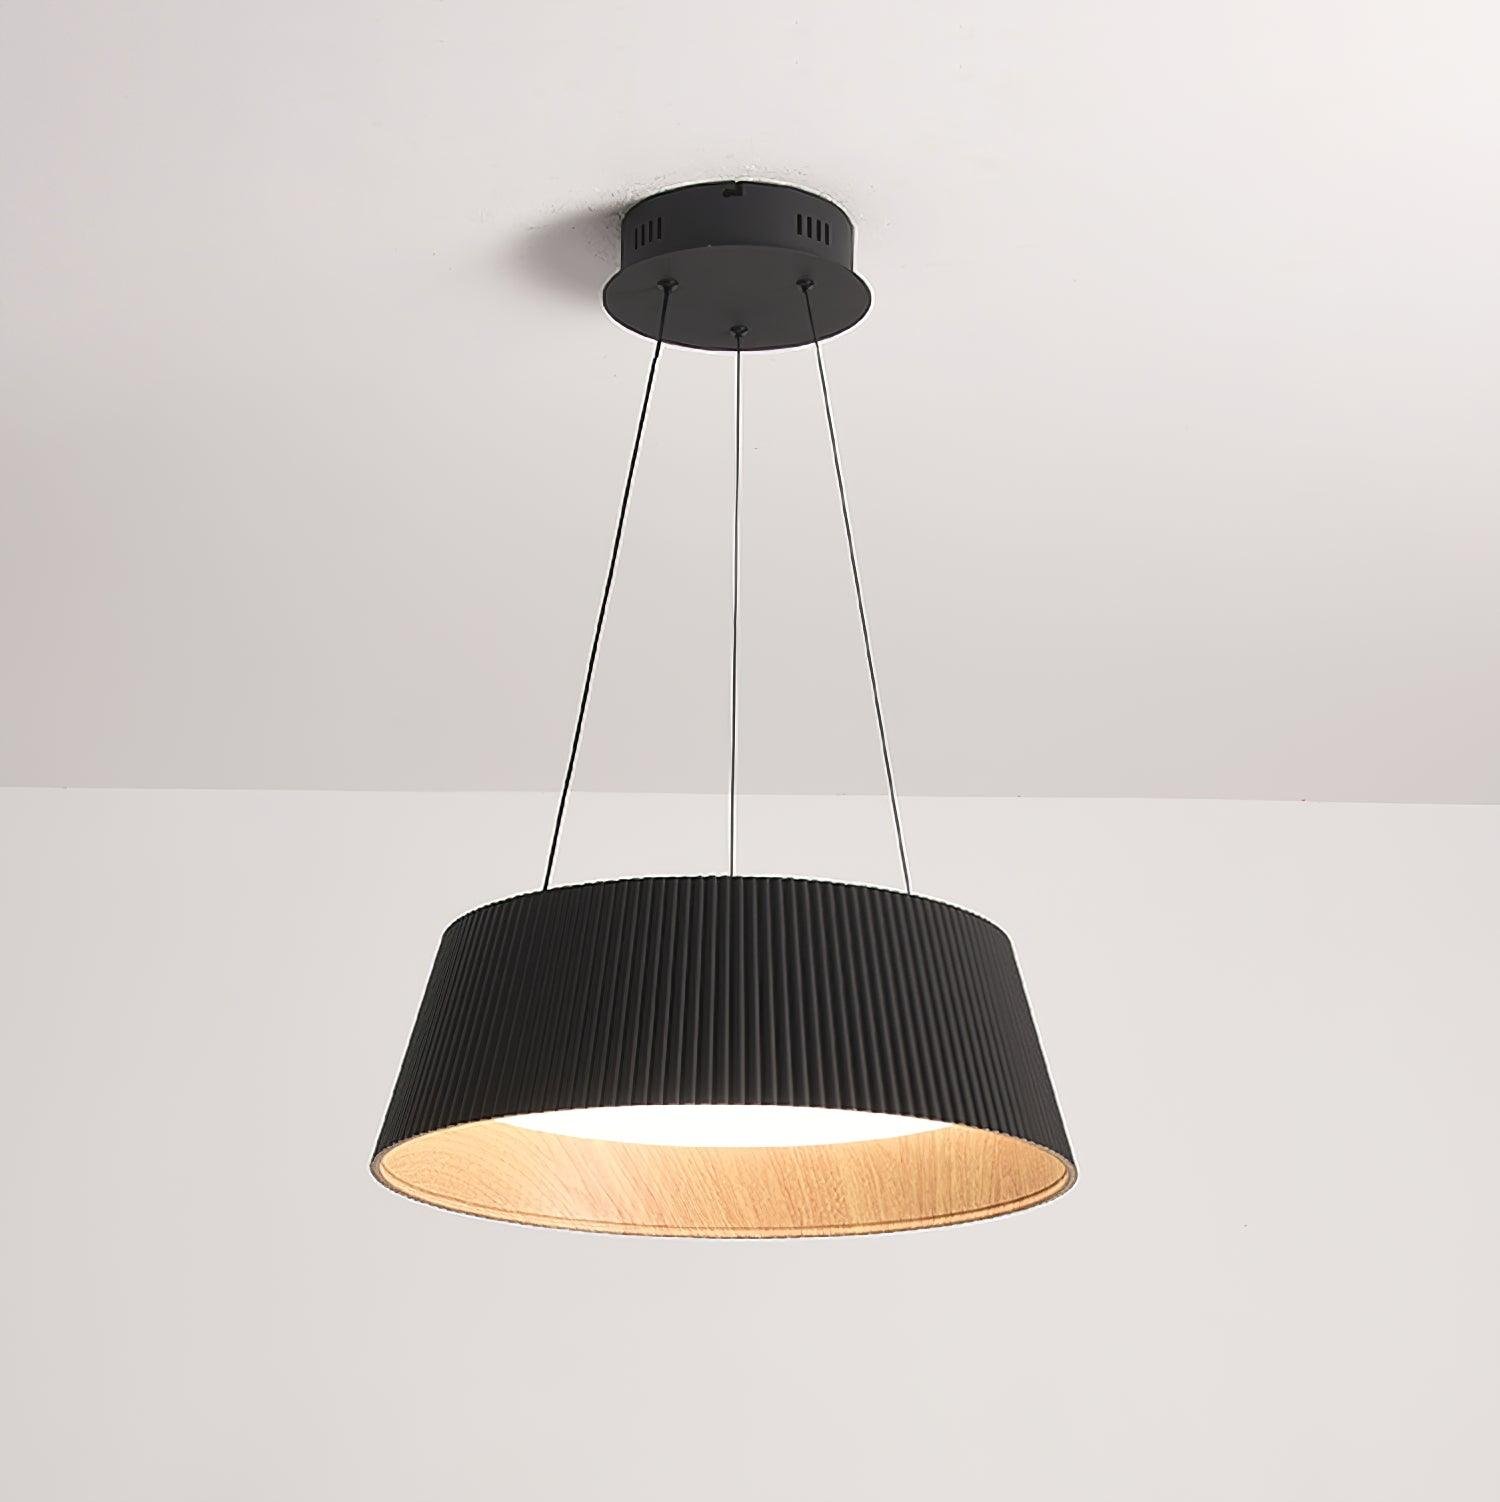 Black Modern Ribbed Pendant Light, measuring 18.1 inches in diameter and 5.9 inches in height (46cm x 15cm), emitting a cool light.